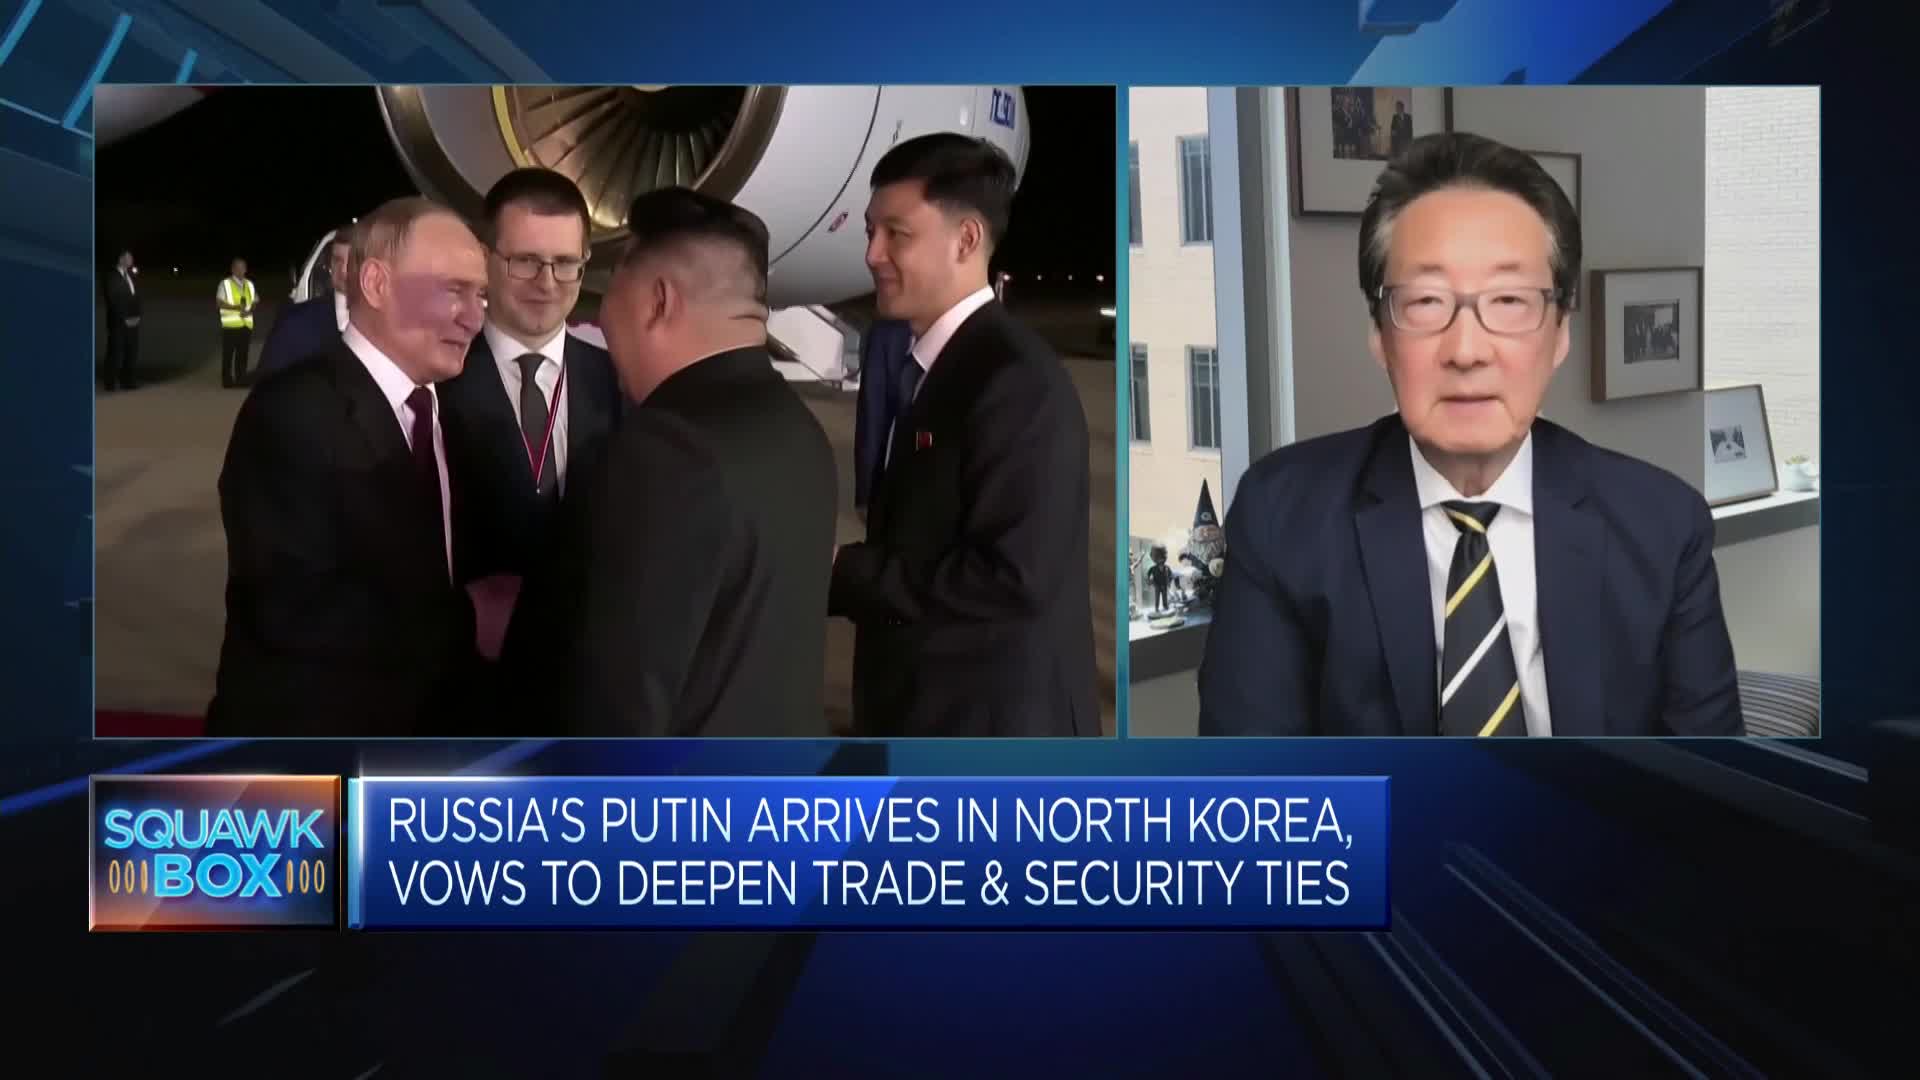 Putin-Kim summit likely to result in closer military ties, says CSIS expert